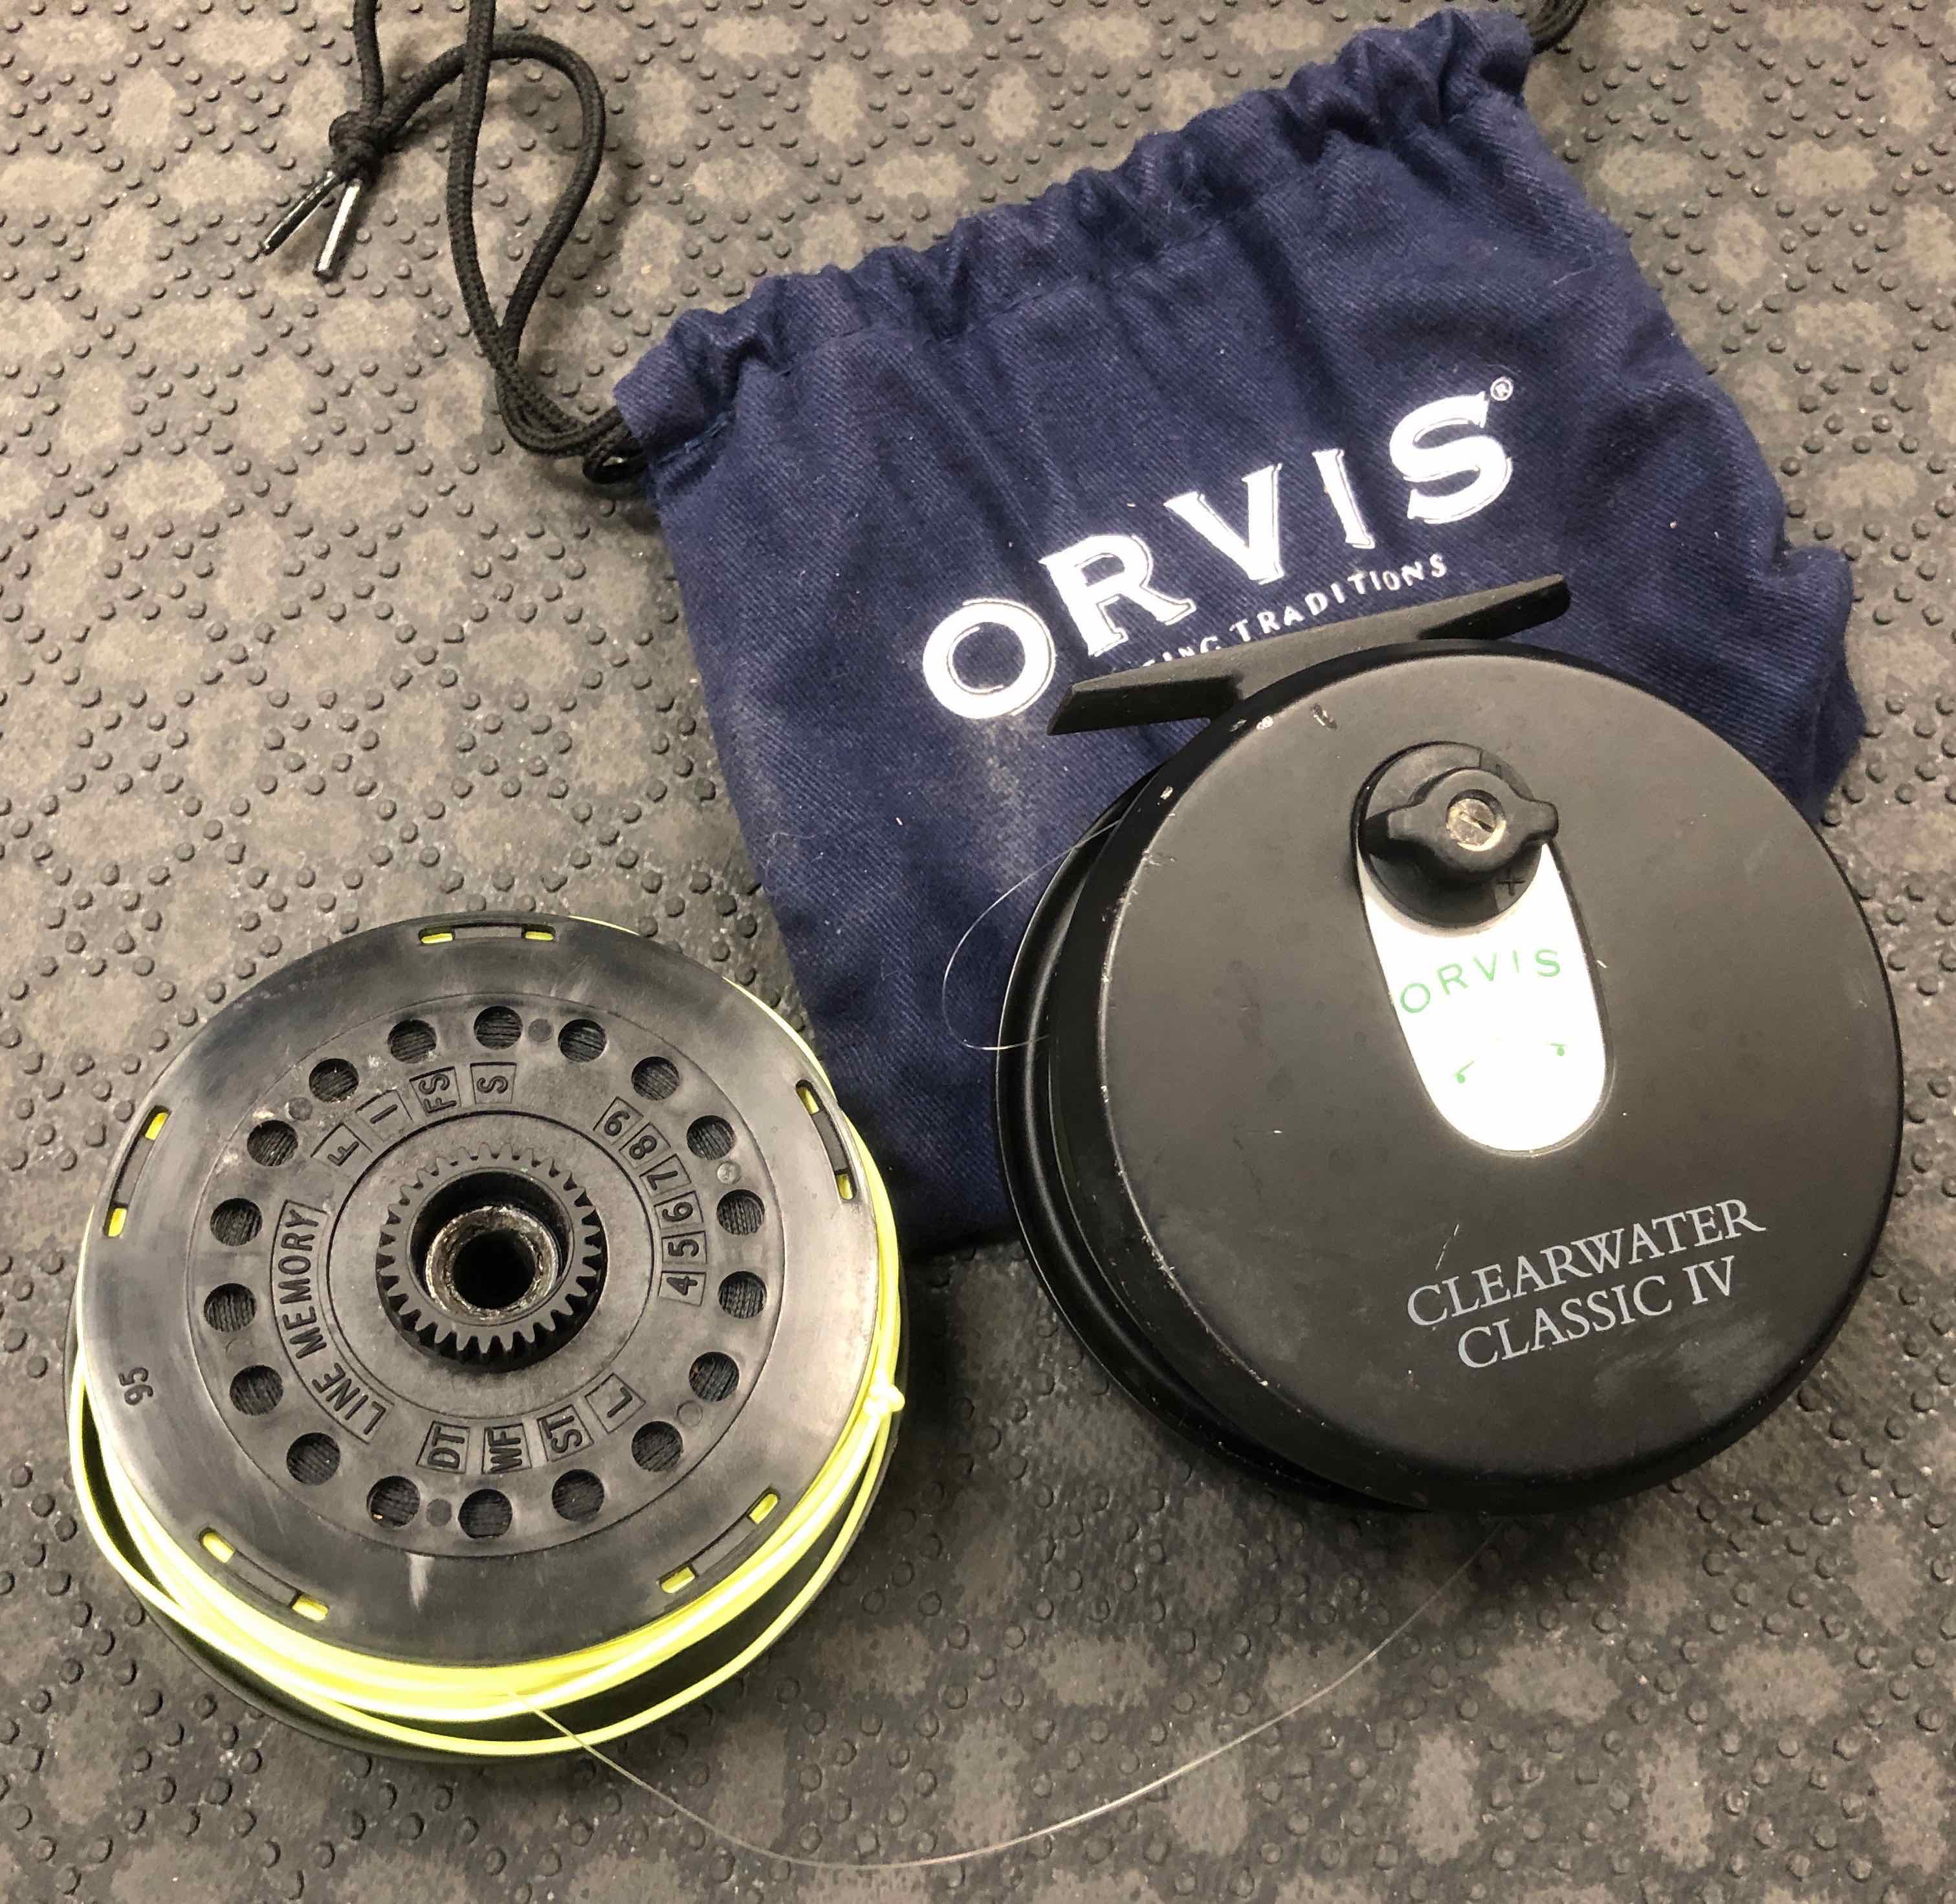 SOLD! – Orvis Clearwater Classic IV 7/8 Fly Reel c/w Spare Spool